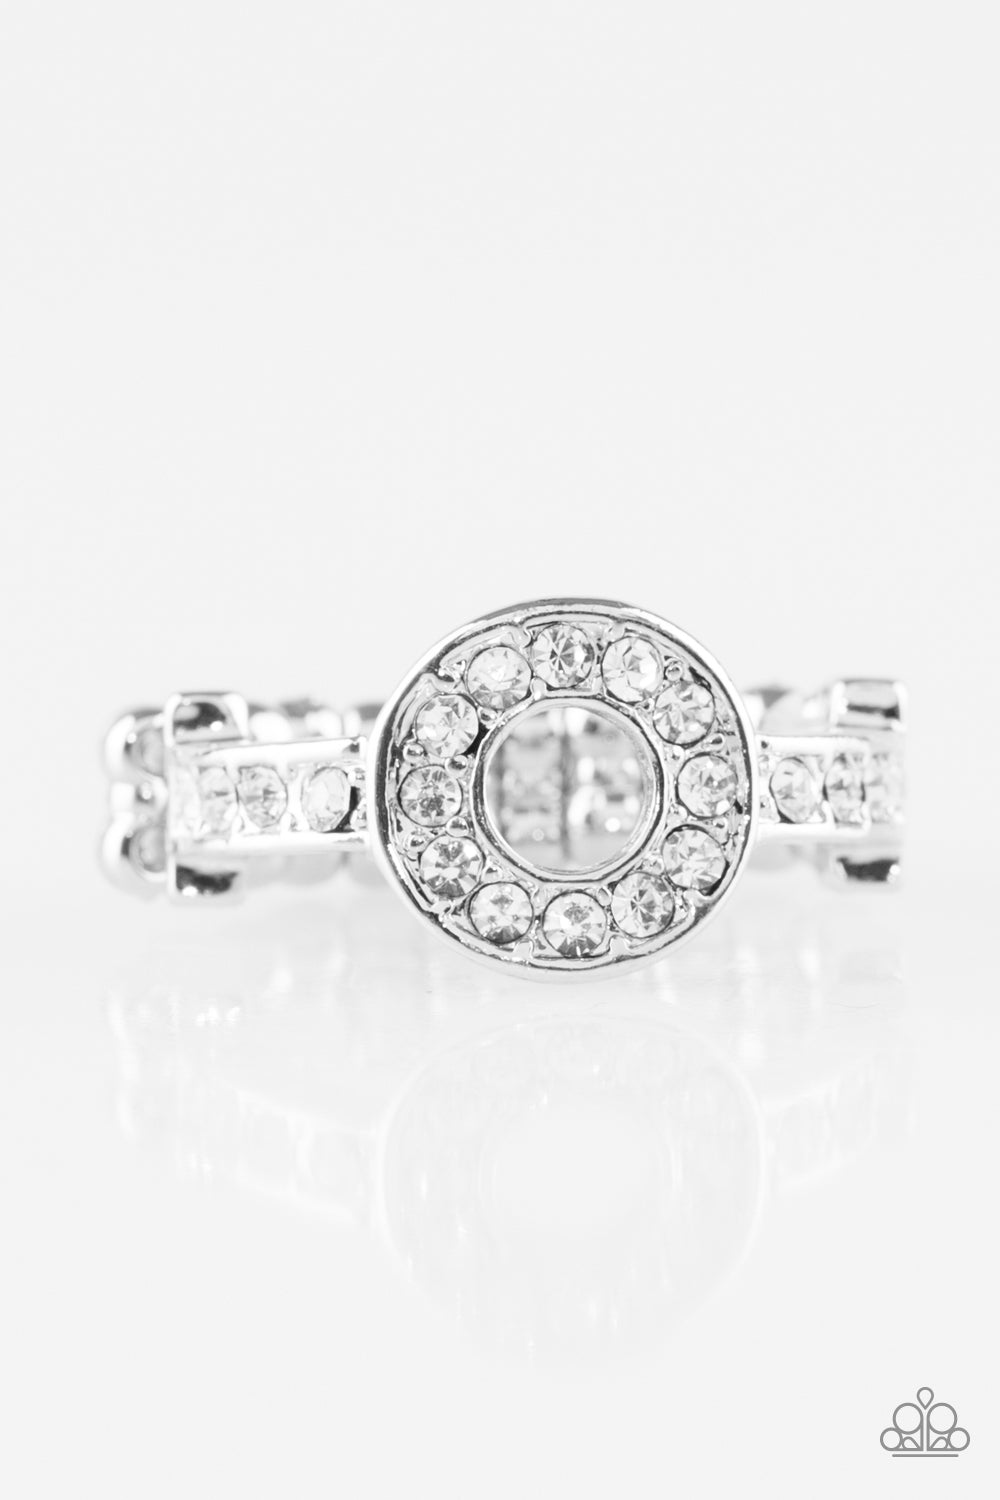 THE ONE AND ONLY SPARKLE - WHITE DAINTY RHINESTONES CIRCLE RING